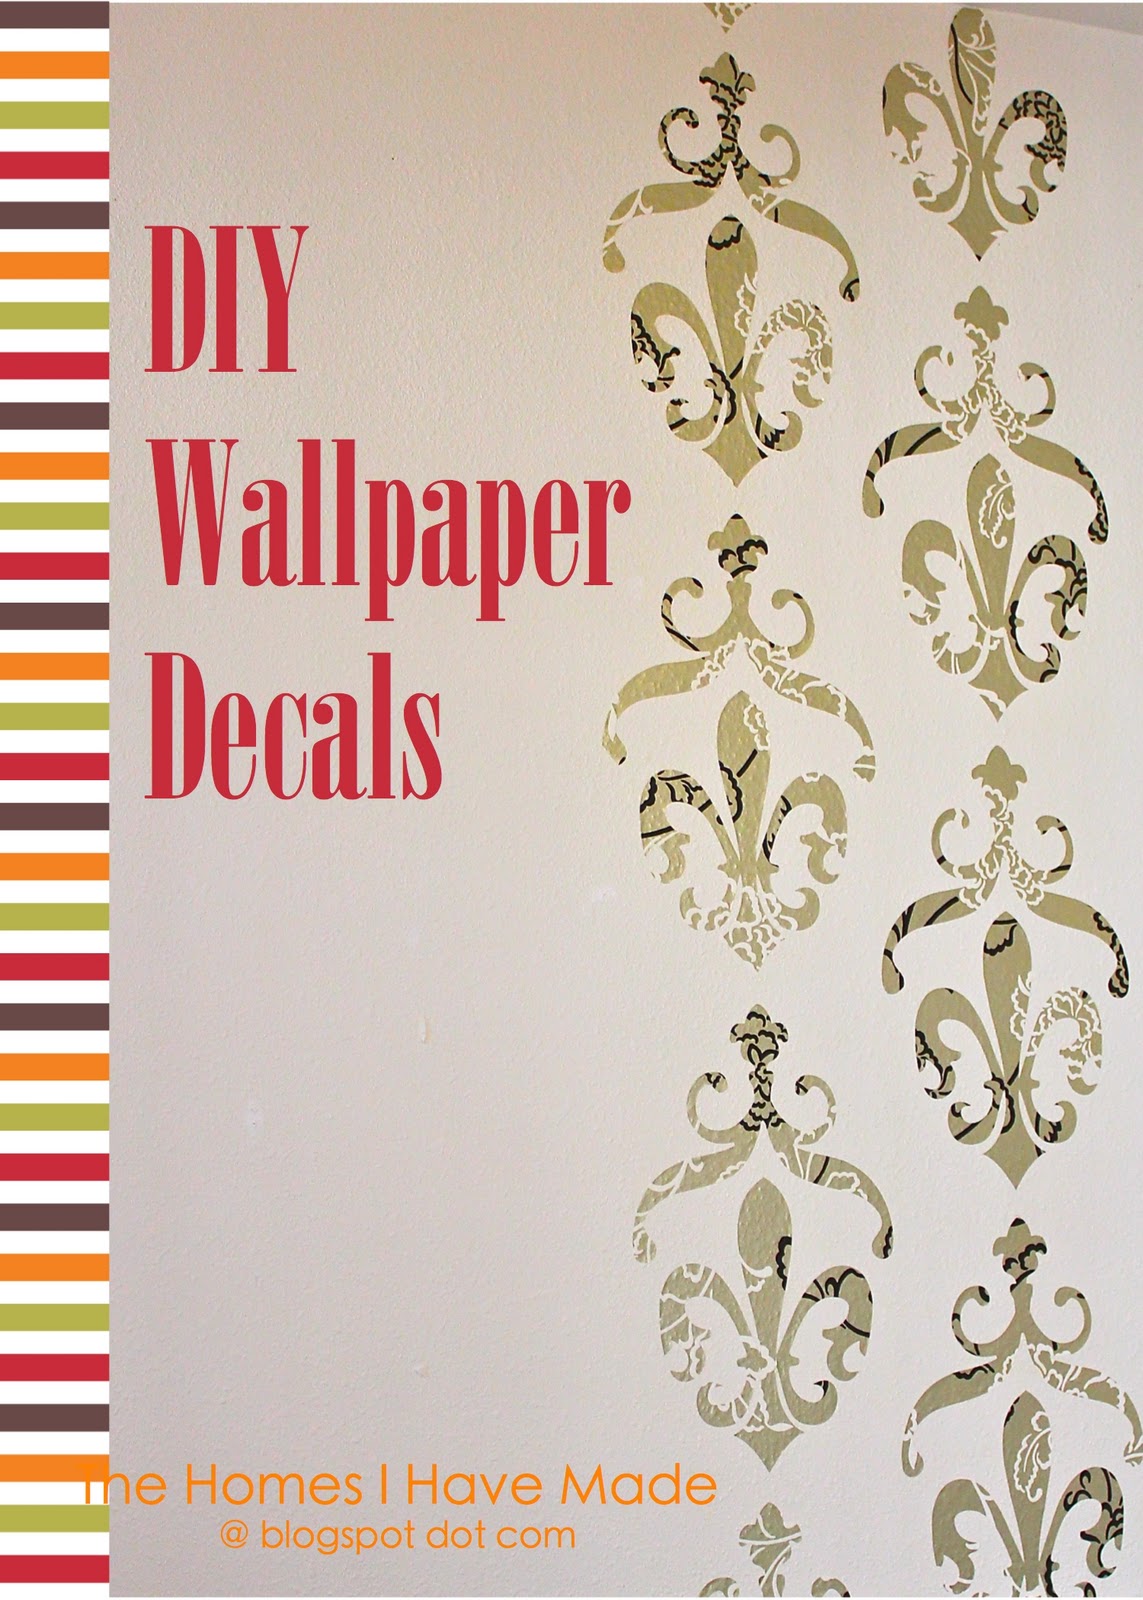 The Homes I Have Made Diy Wallpaper Decals A Tutorial